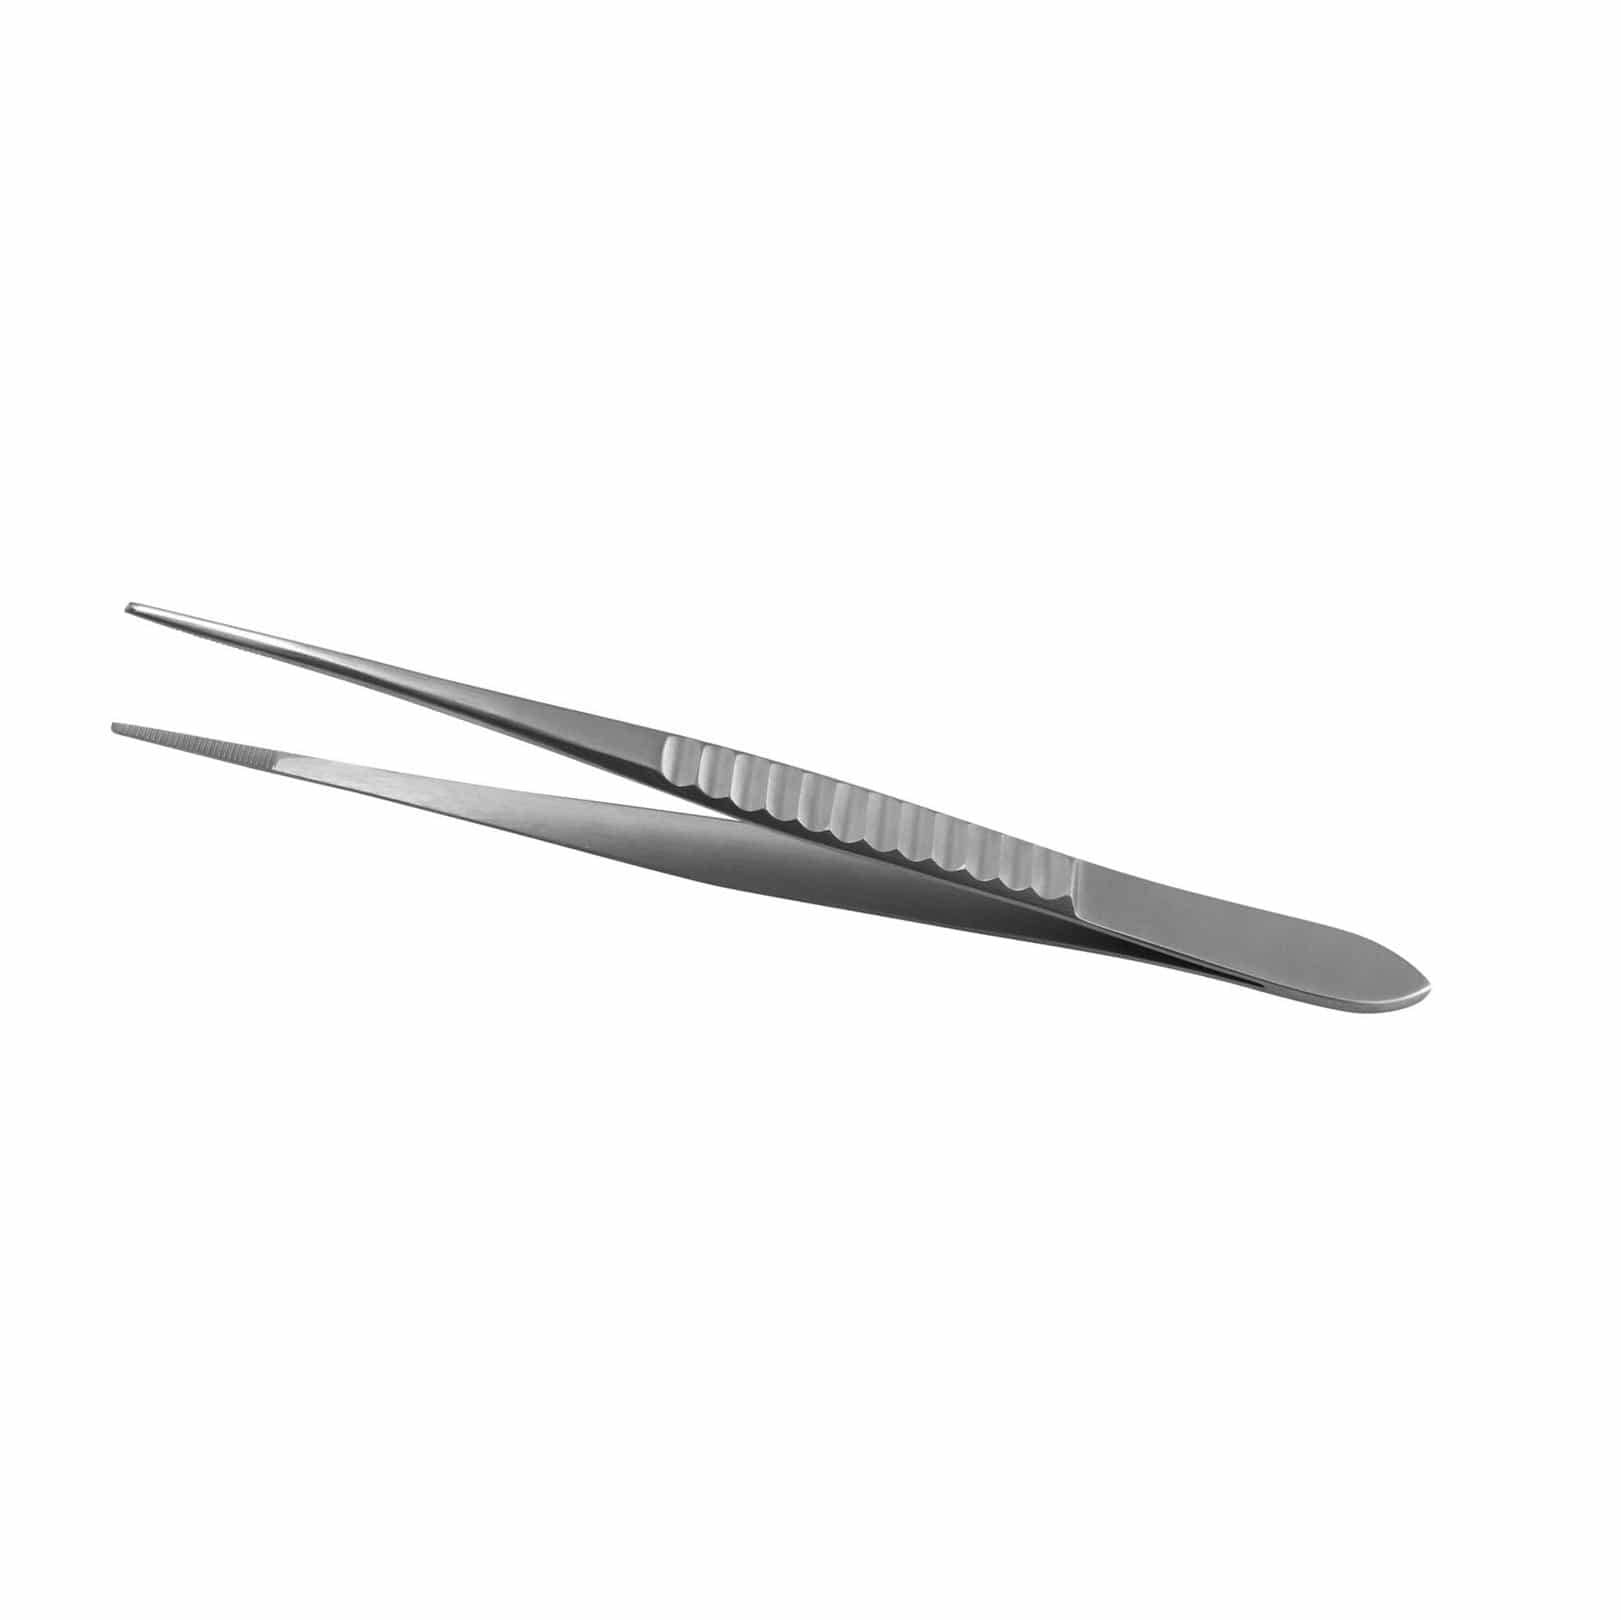 Armo Surgical Instruments 12.5cm / Blunt End Armo Forceps Dissecting